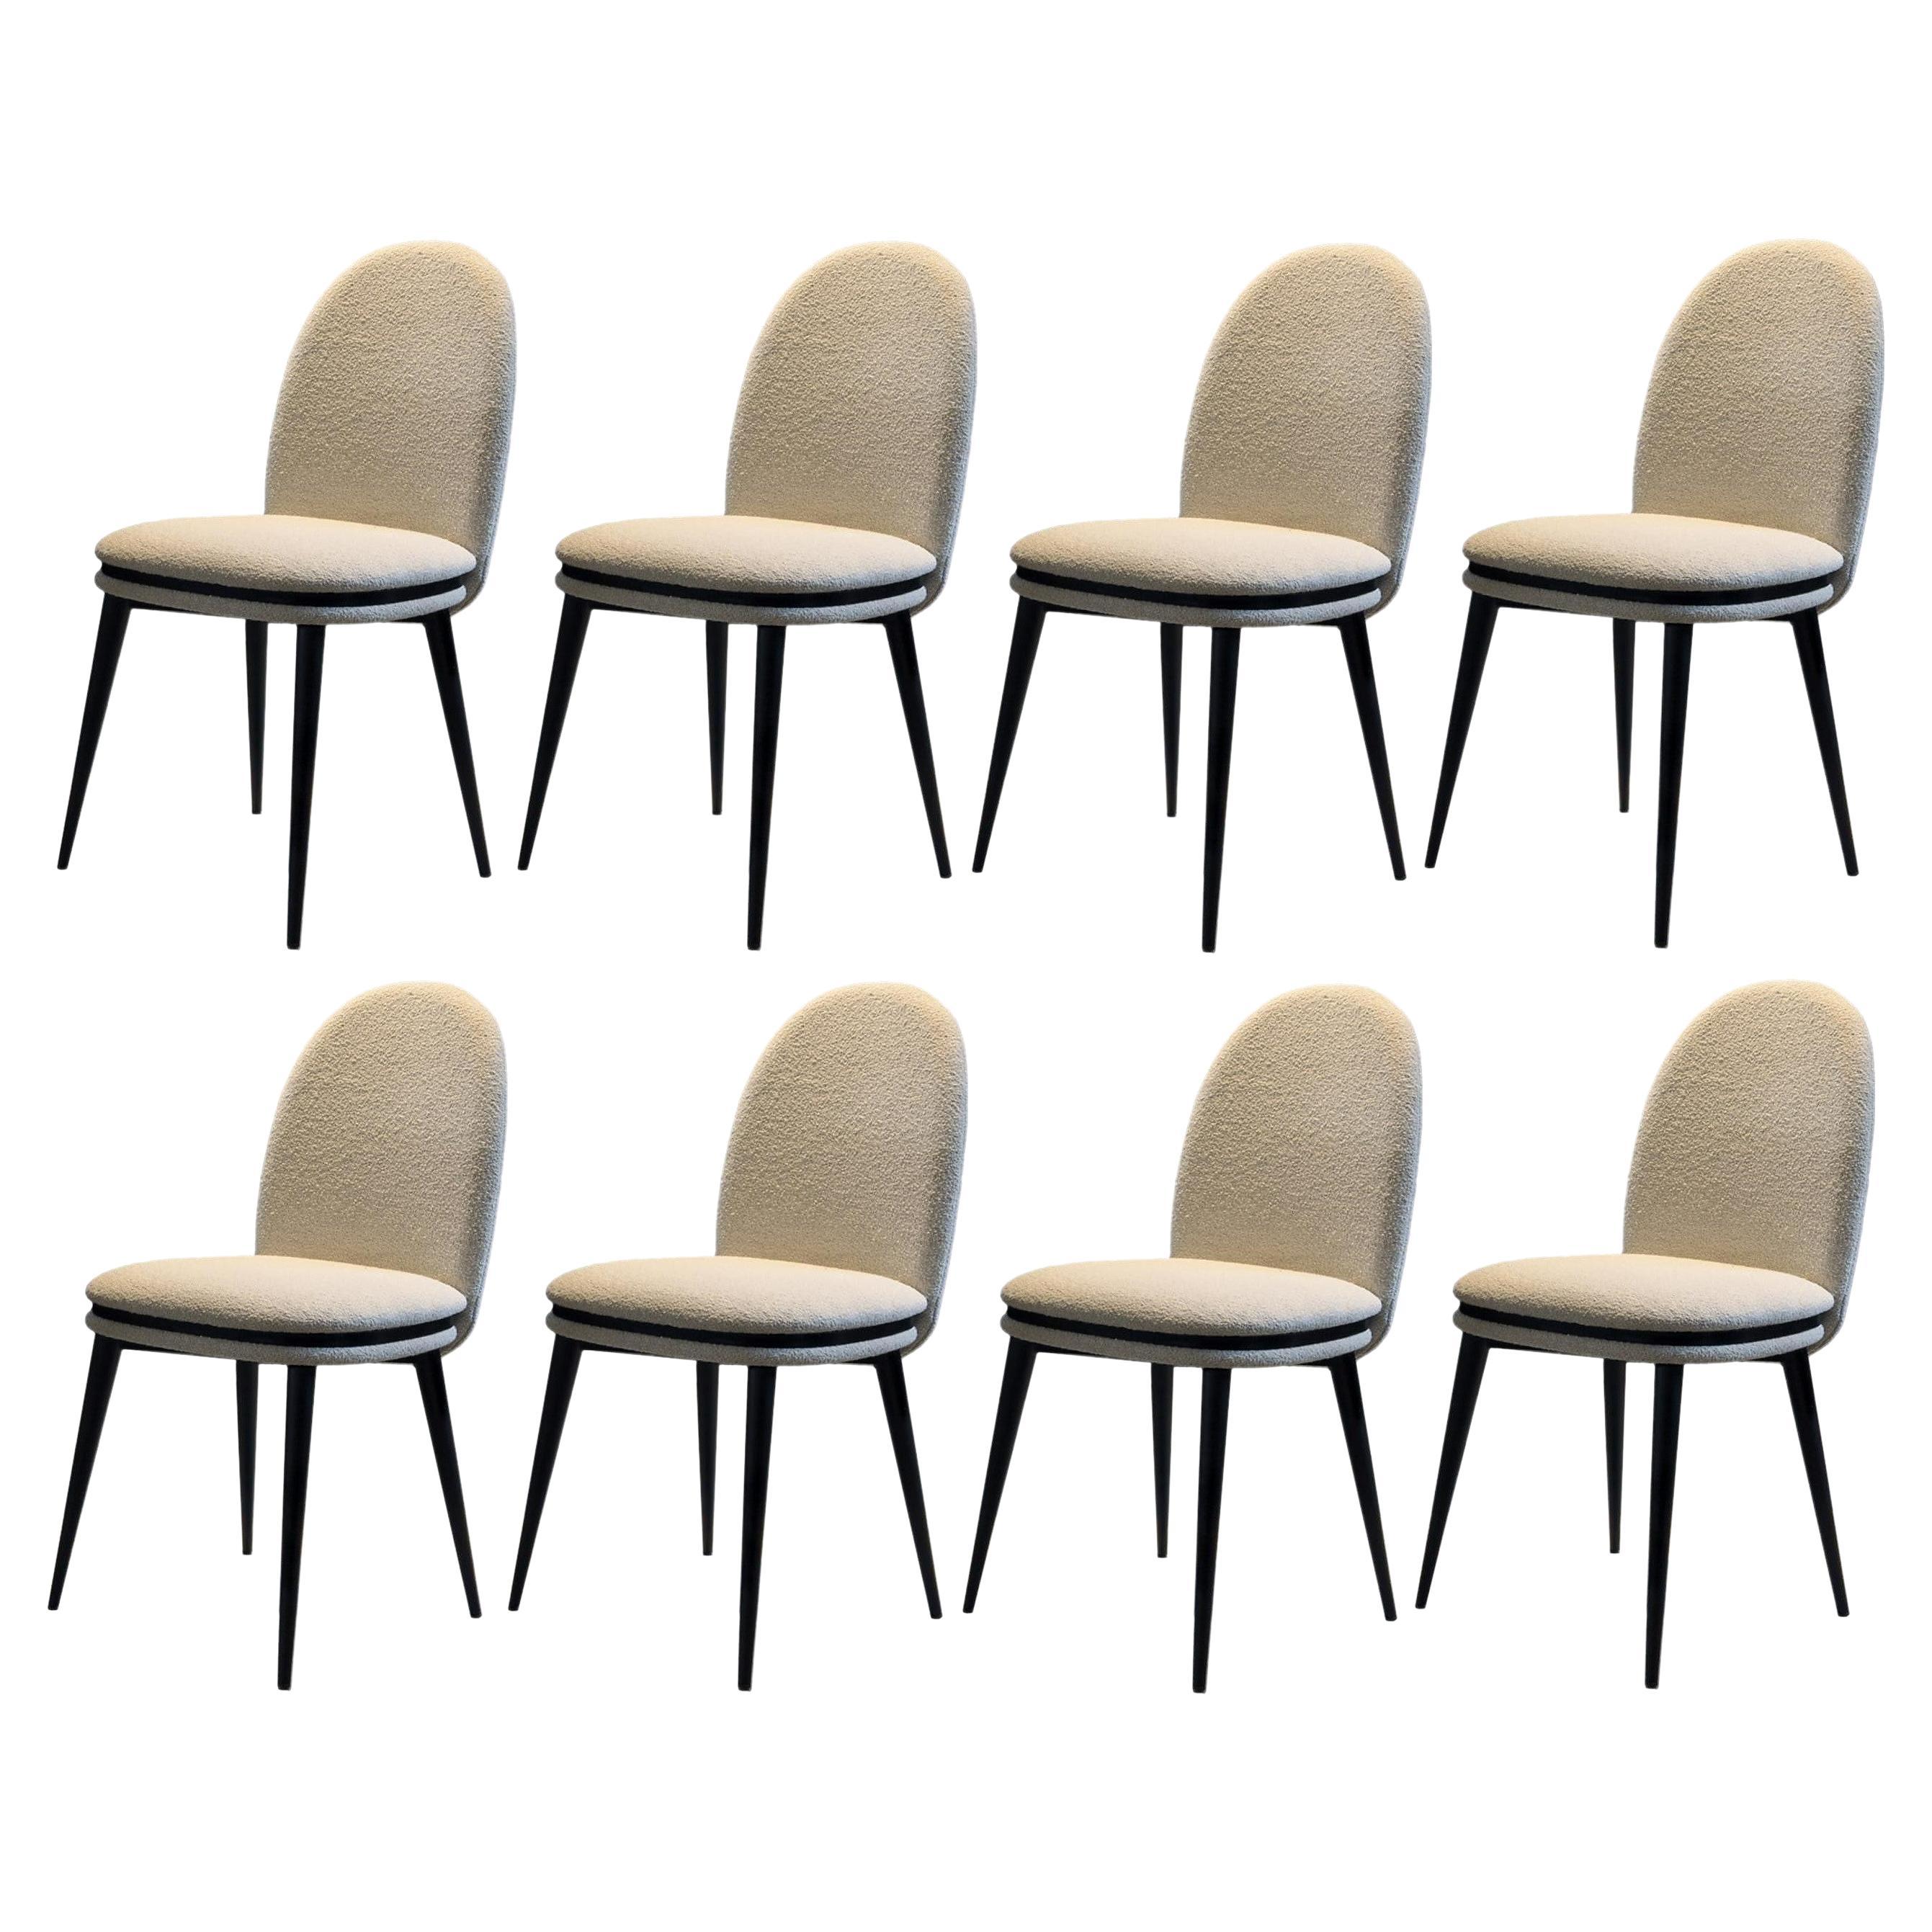 Italian Made Dining Chairs Offered in Bouclé, Set of 8